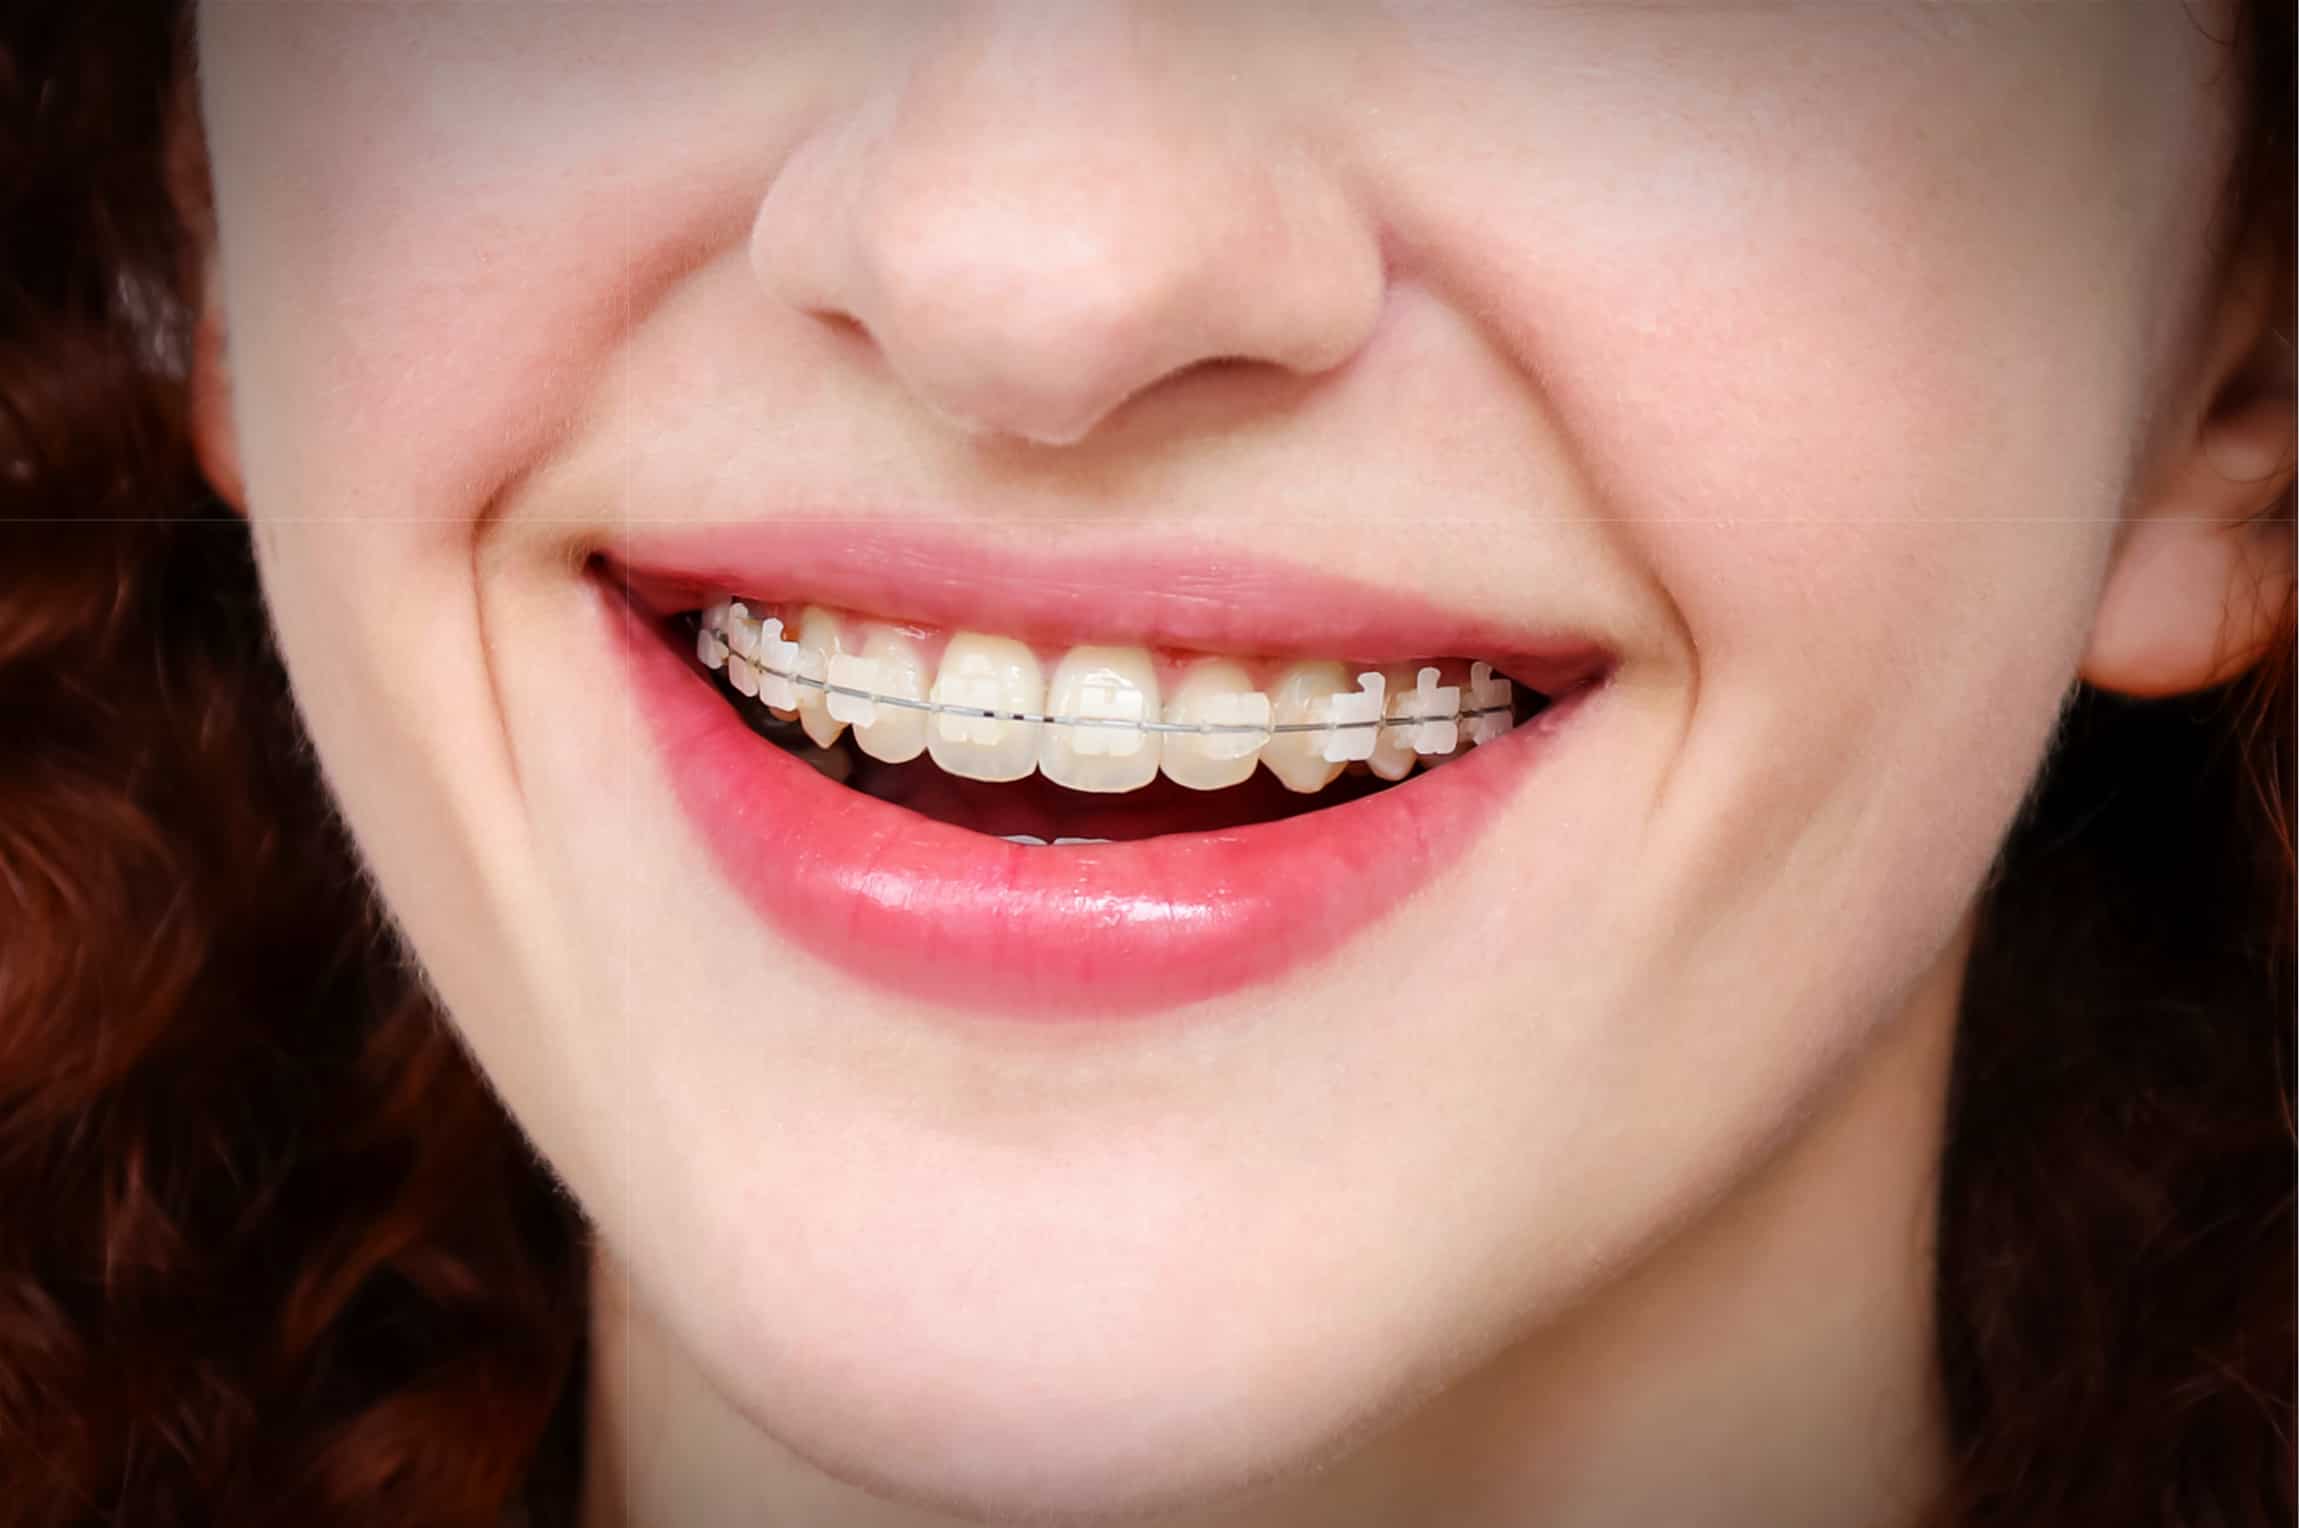 clear dental braces are one of our orthodontic services